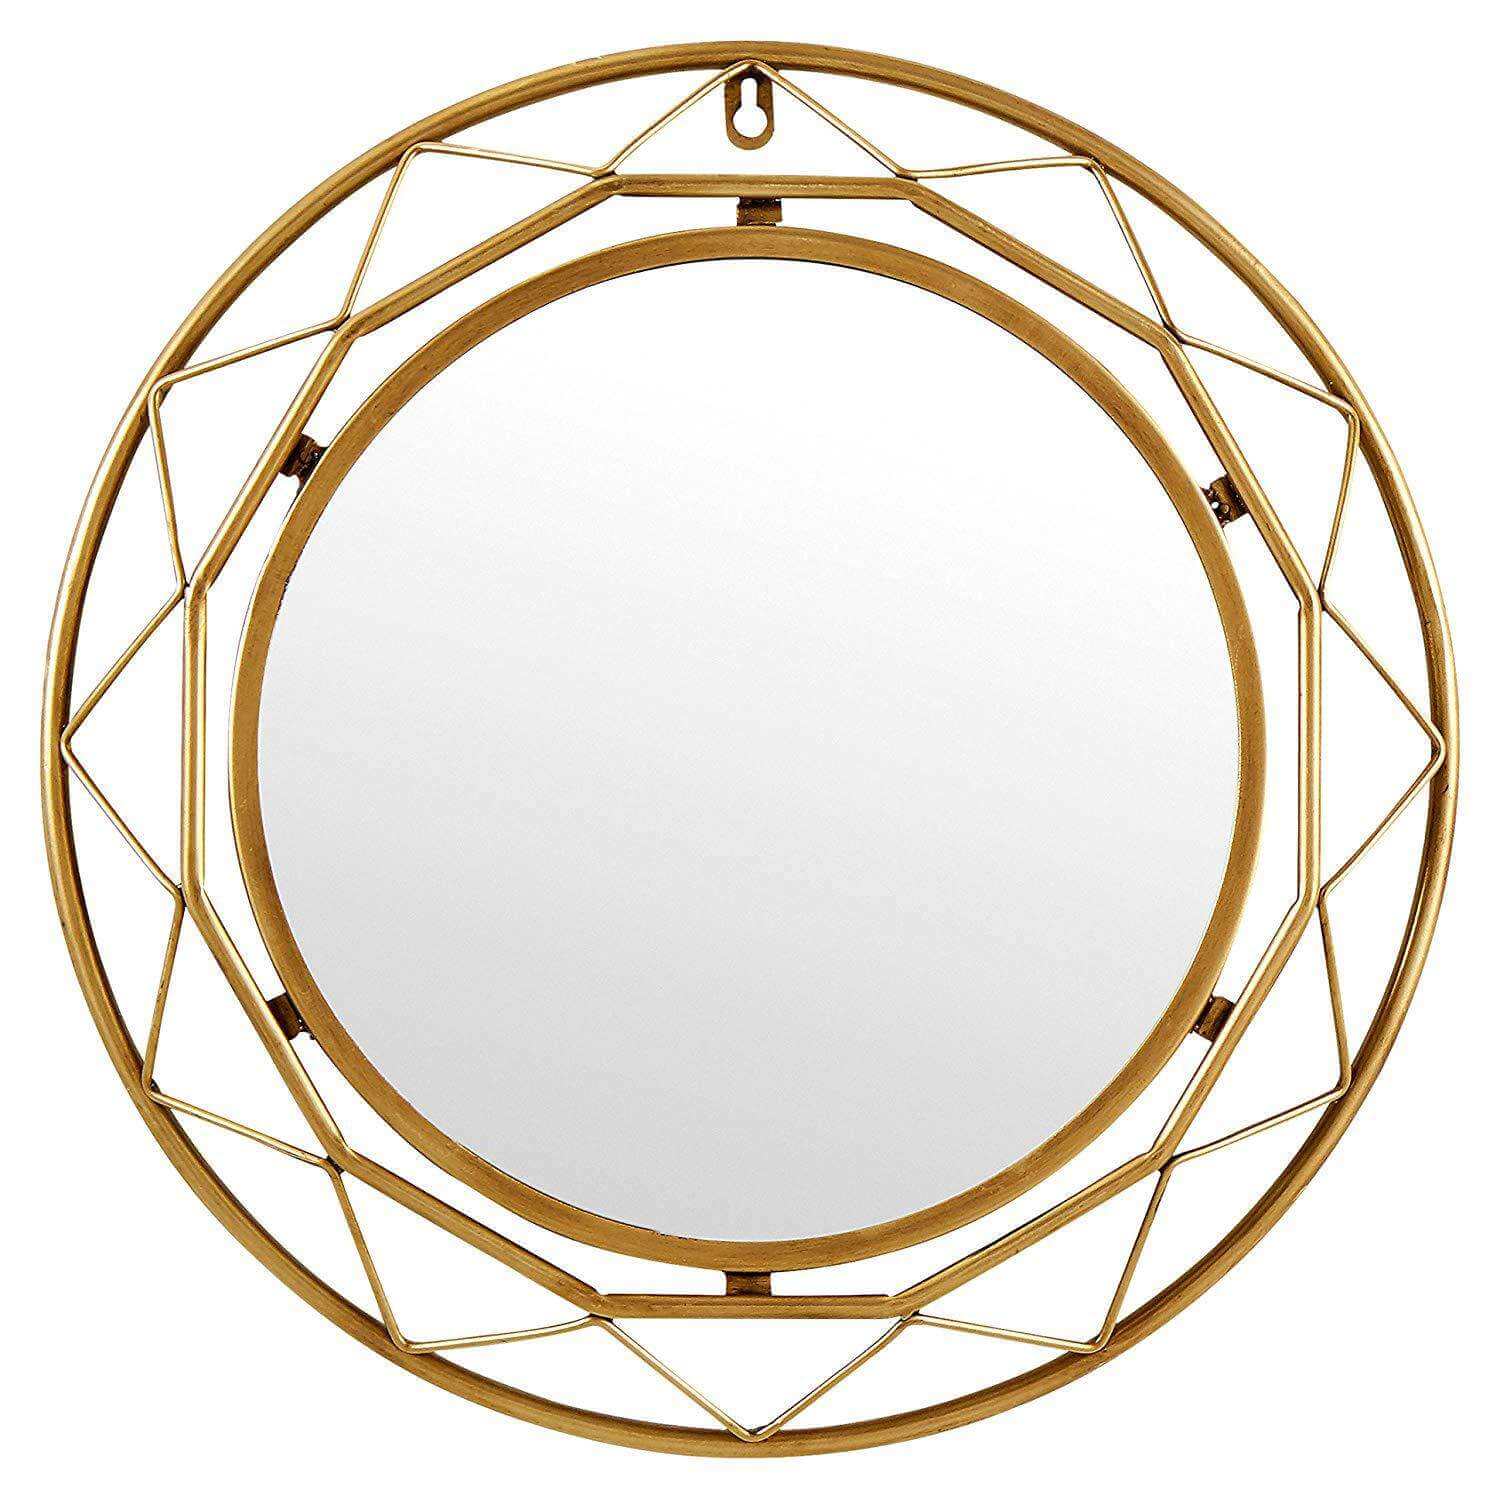 Living Room Decorative Gold Metal Wire Round Wall Mounted Mirrors Decor